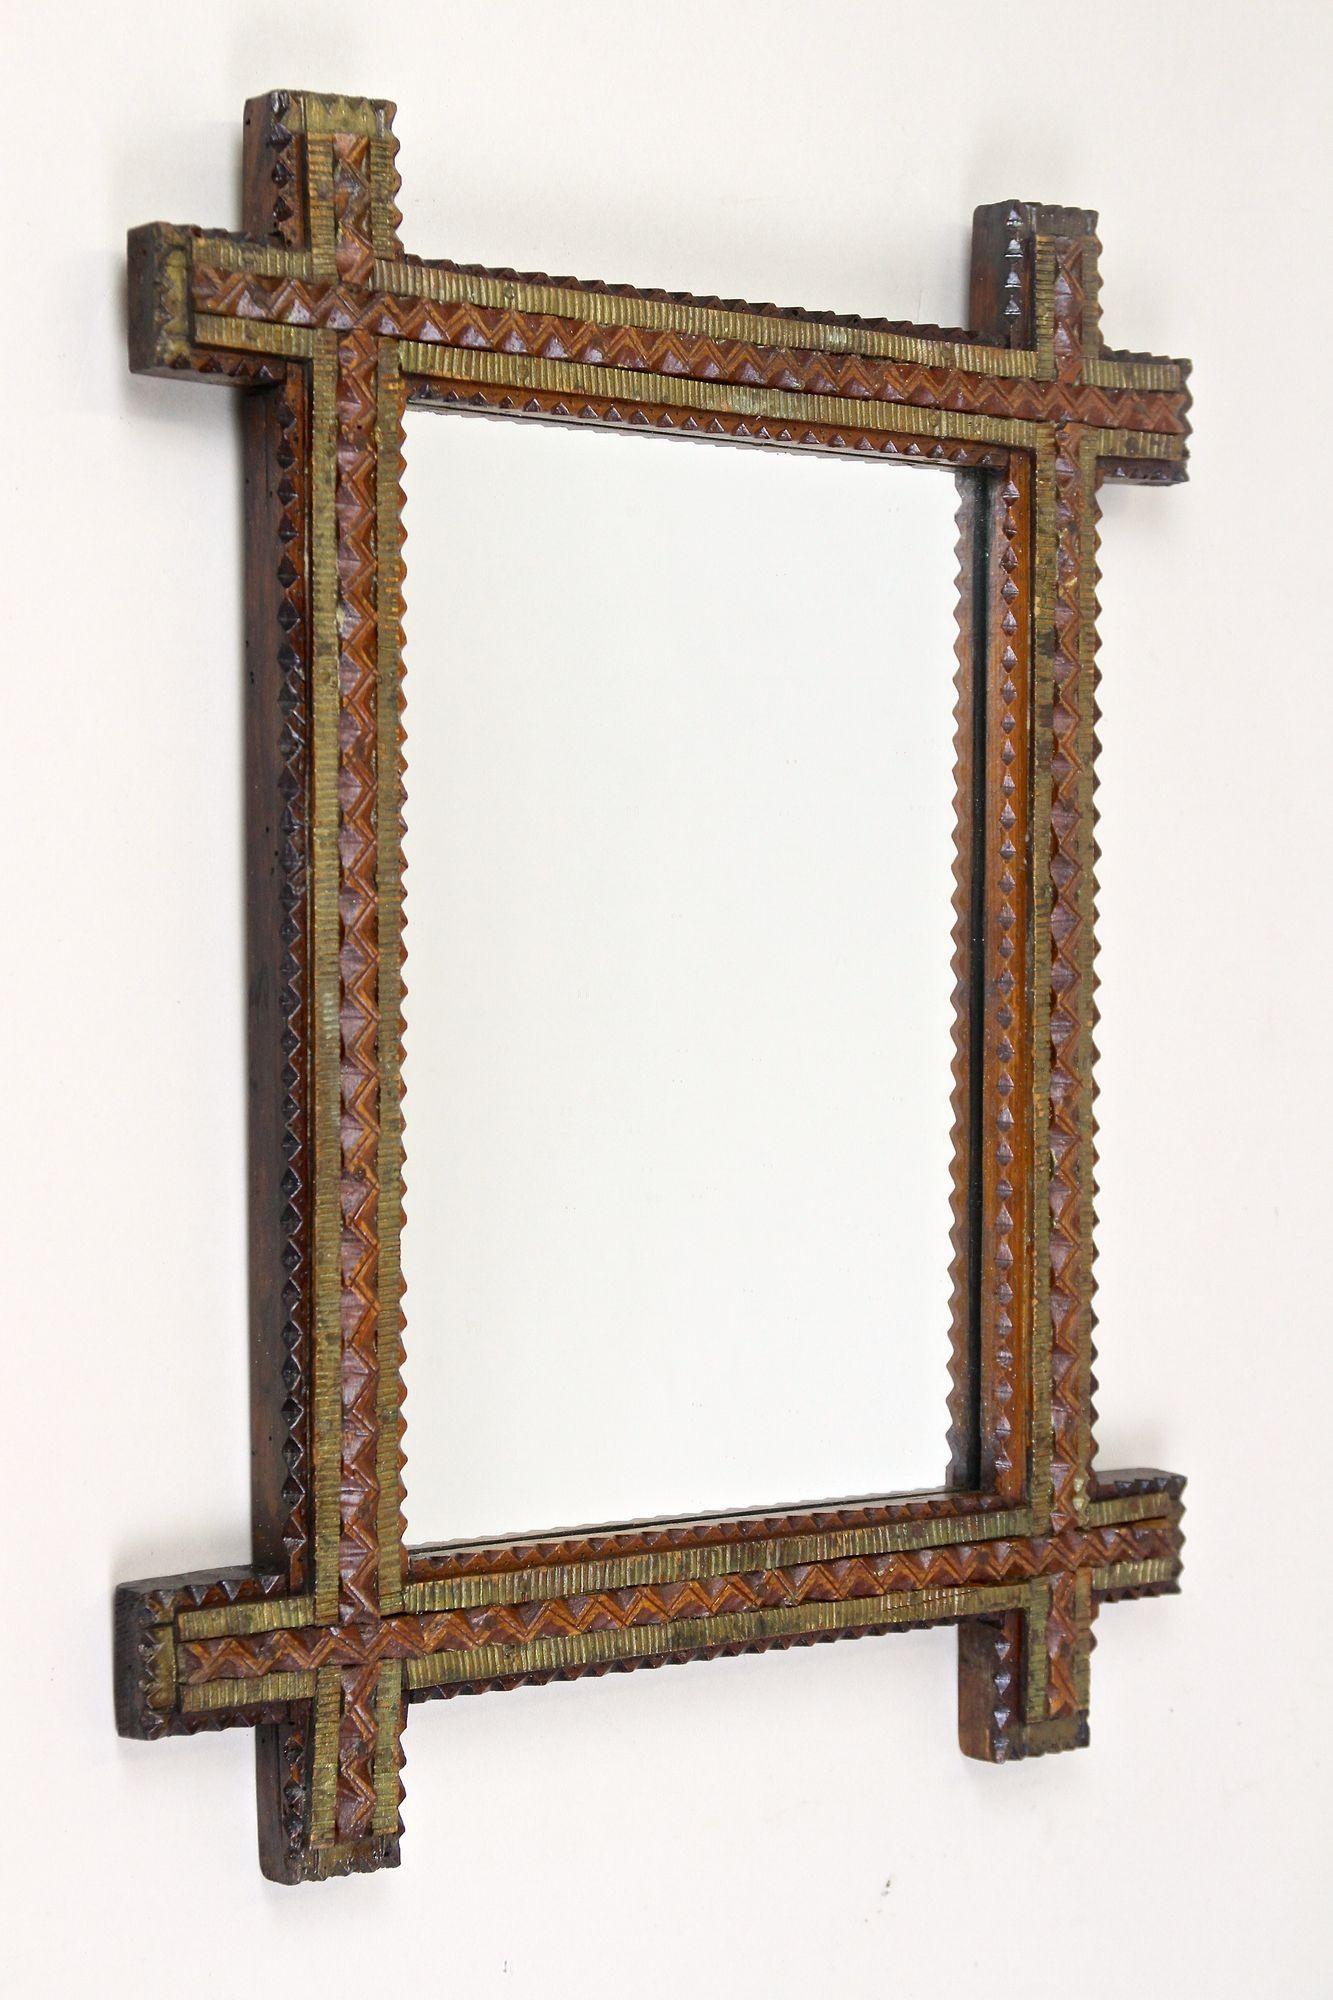 Beautiful crafted late 19th century Tramp Art mirror out of Austria. Elaborately made around 1870, this small rustic mirror impresses with its different artfully hand-carved bars. An absolute design highlight is the great idea of using various